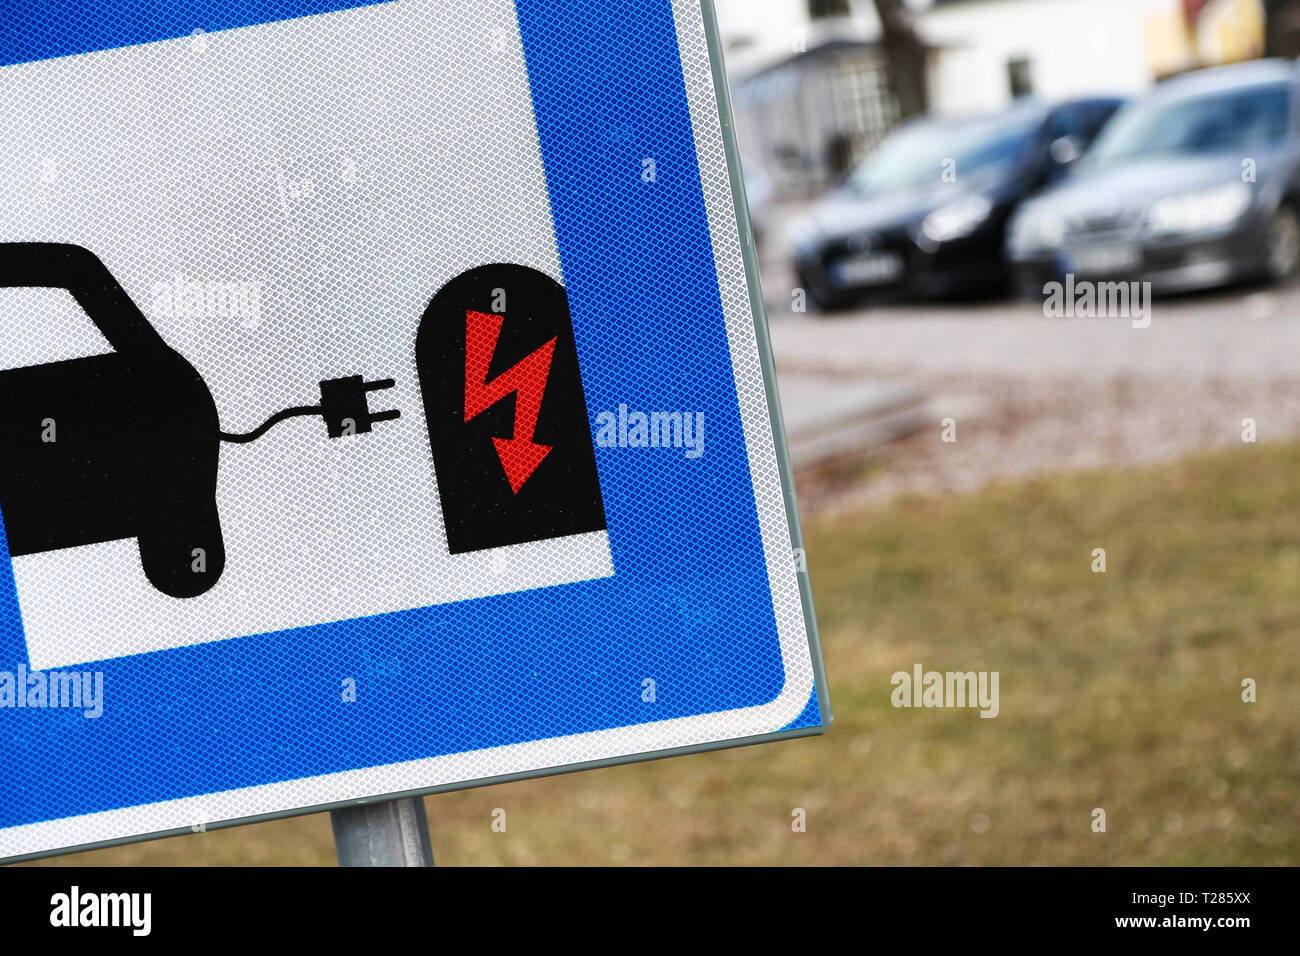 VADSTENA 2017-03-21 Symbol, at a parking lot, for charging station of electric car. Photo Jeppe Gustafsson Stock Photo